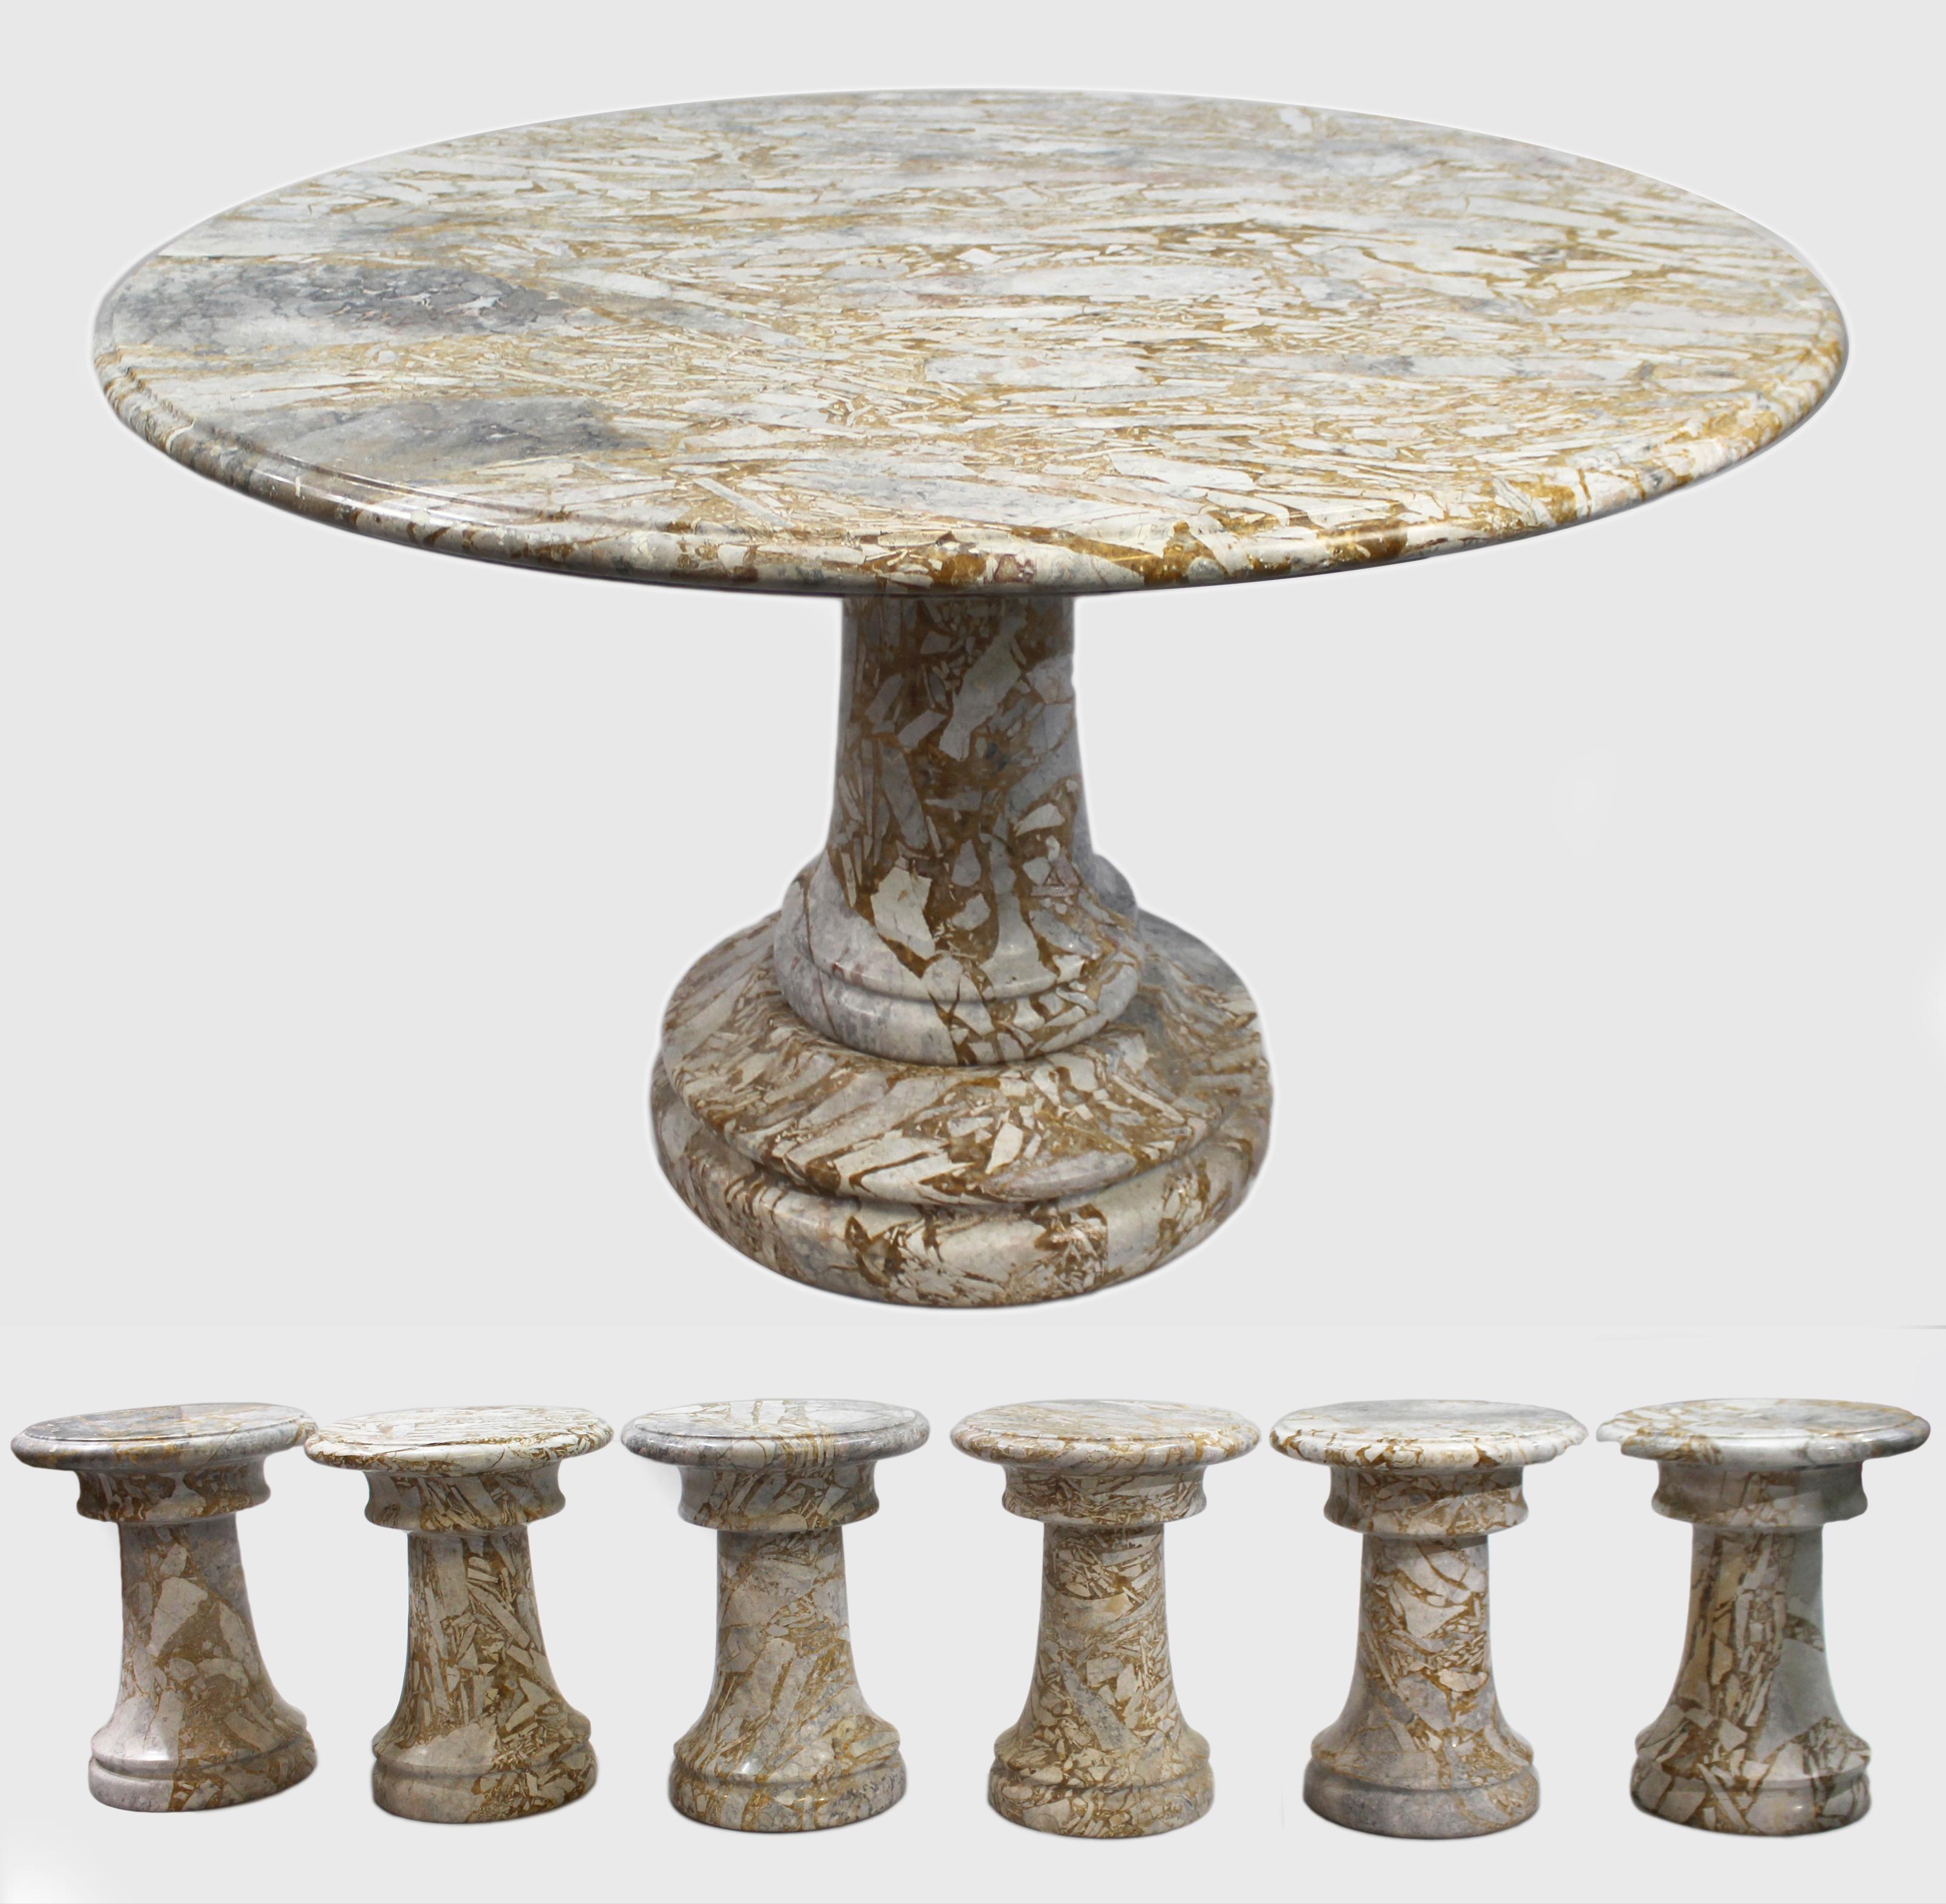 Fine Middle Eastern circular marble table & 6 stools


We are very pleased to offer a superb quality carved marble centre table & six dining stools.

Purchased in Abu Dhabi 10 years ago for over £10,000, the table & stools were removed from a